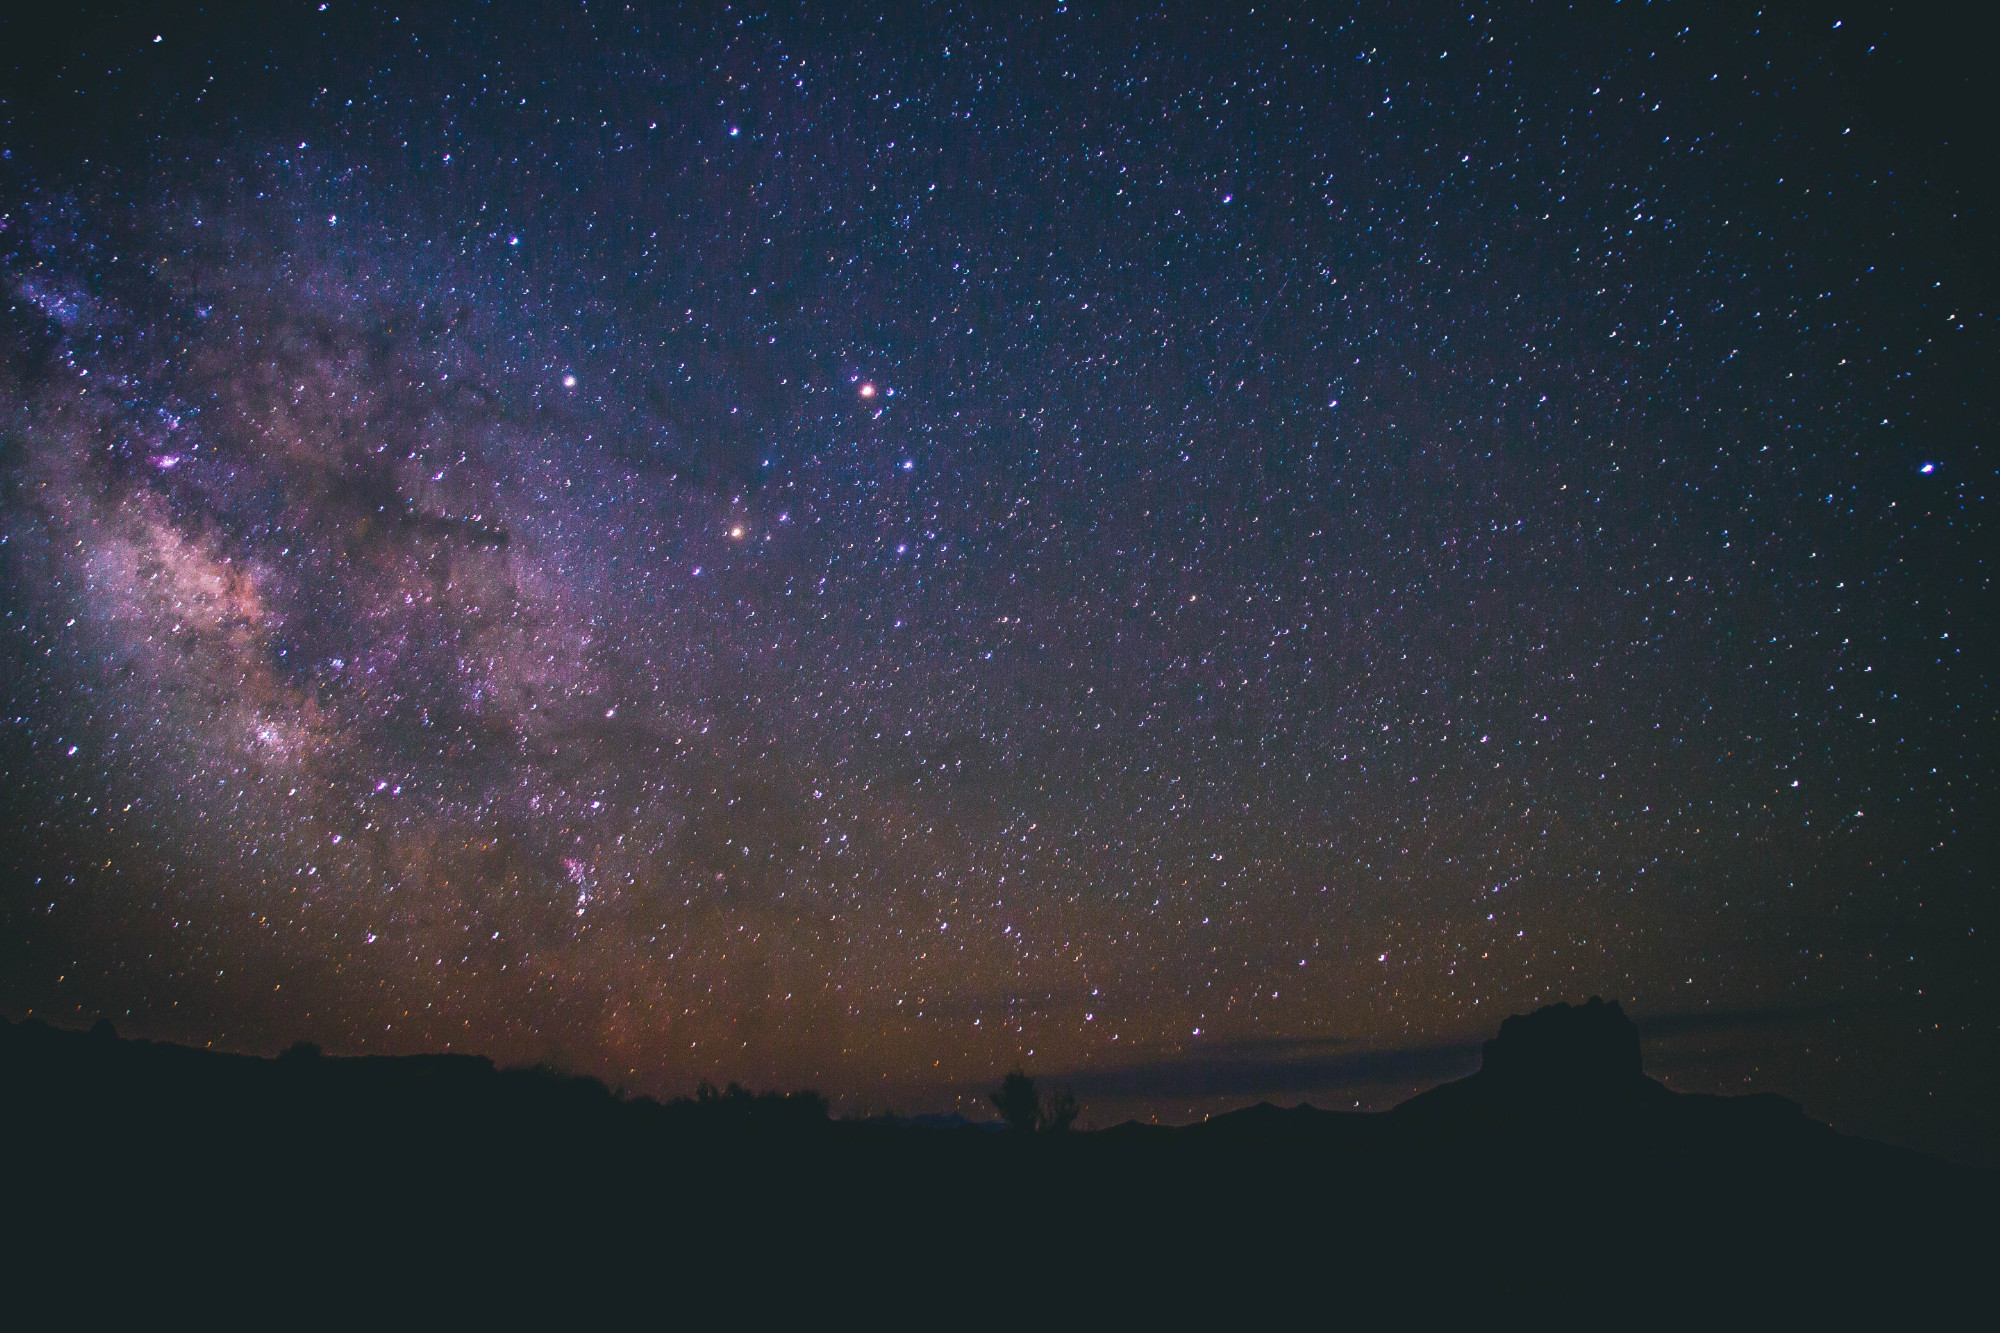 An Open Letter to the Universe: a spoken word piece exploring topics such as existentialism, hope and self-reflection. (An Open Letter to the Universe is a spoken word piece, exploring topics such as existentialism, hope and self-reflection. (Photo by Greg Rakozy on Unsplash).